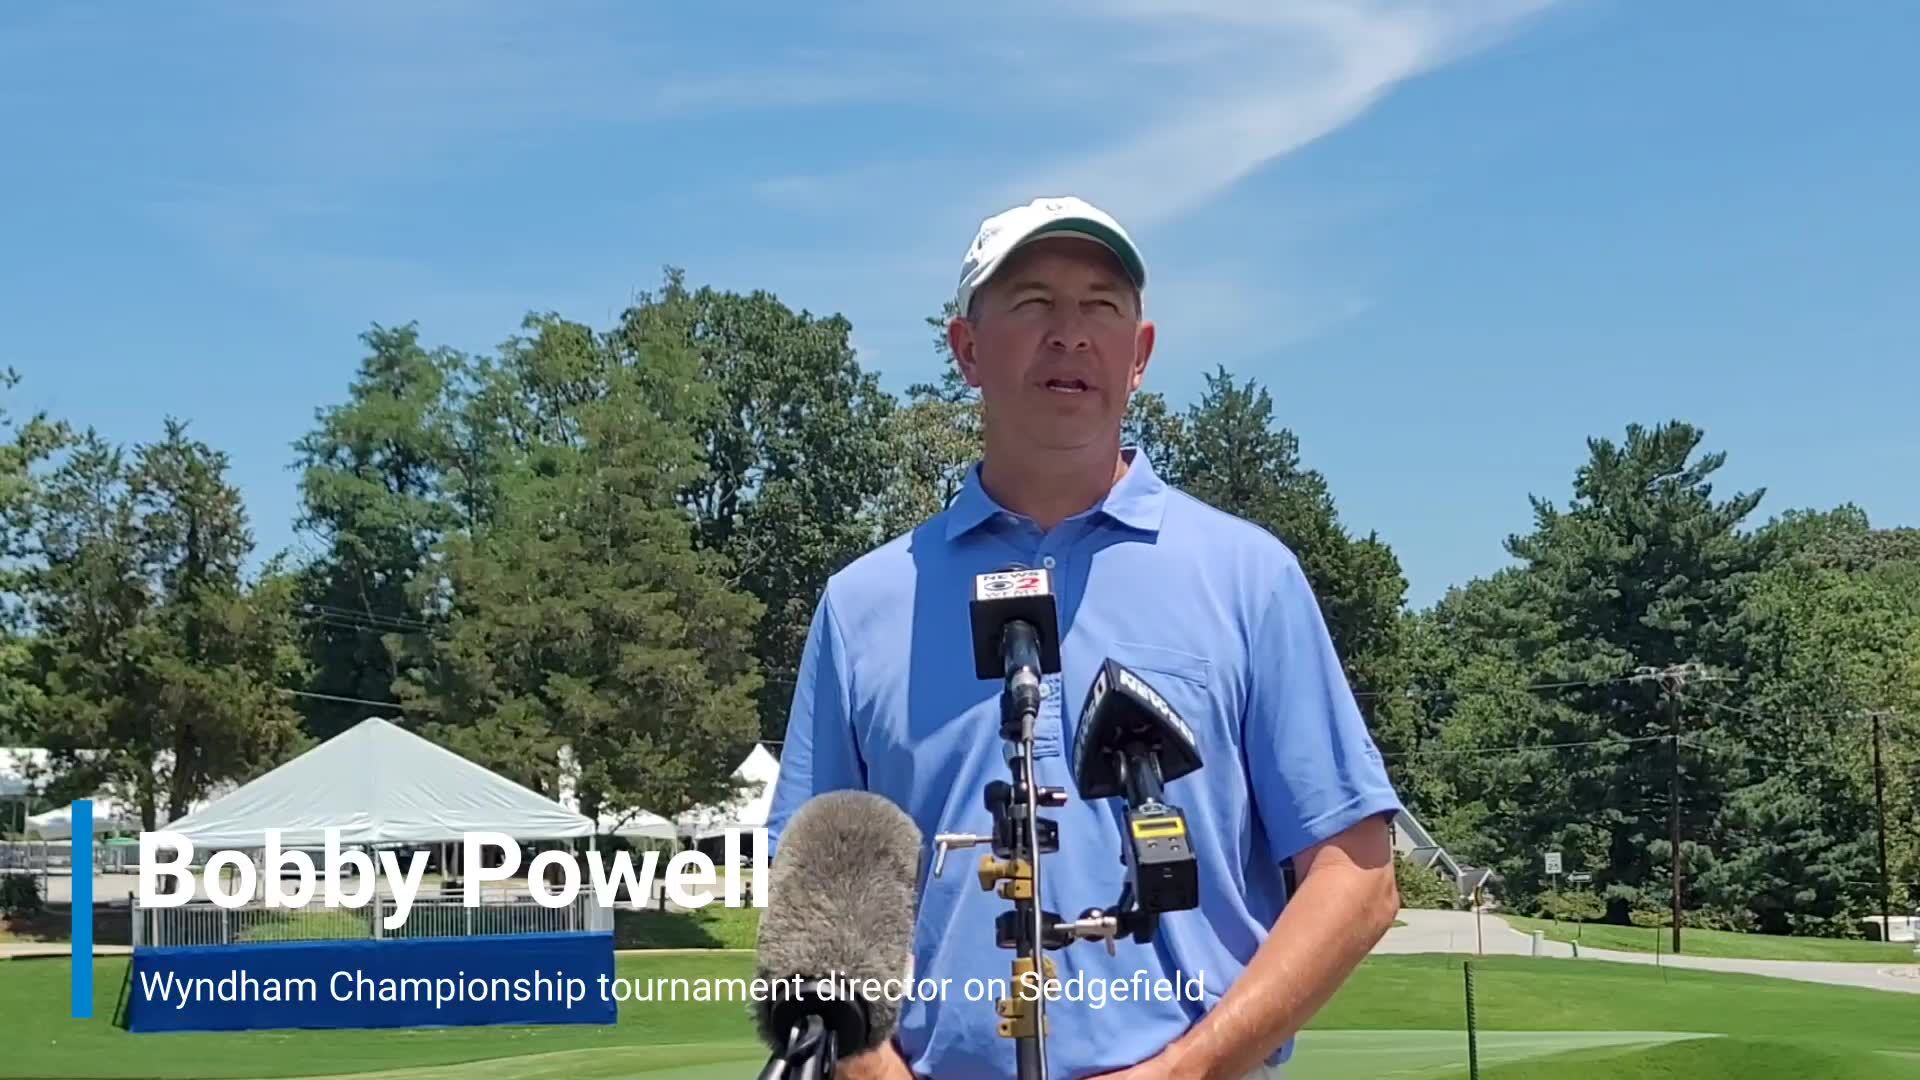 Bobby Powell, Wyndham Championship tournament director, on Sedgefield Country Club